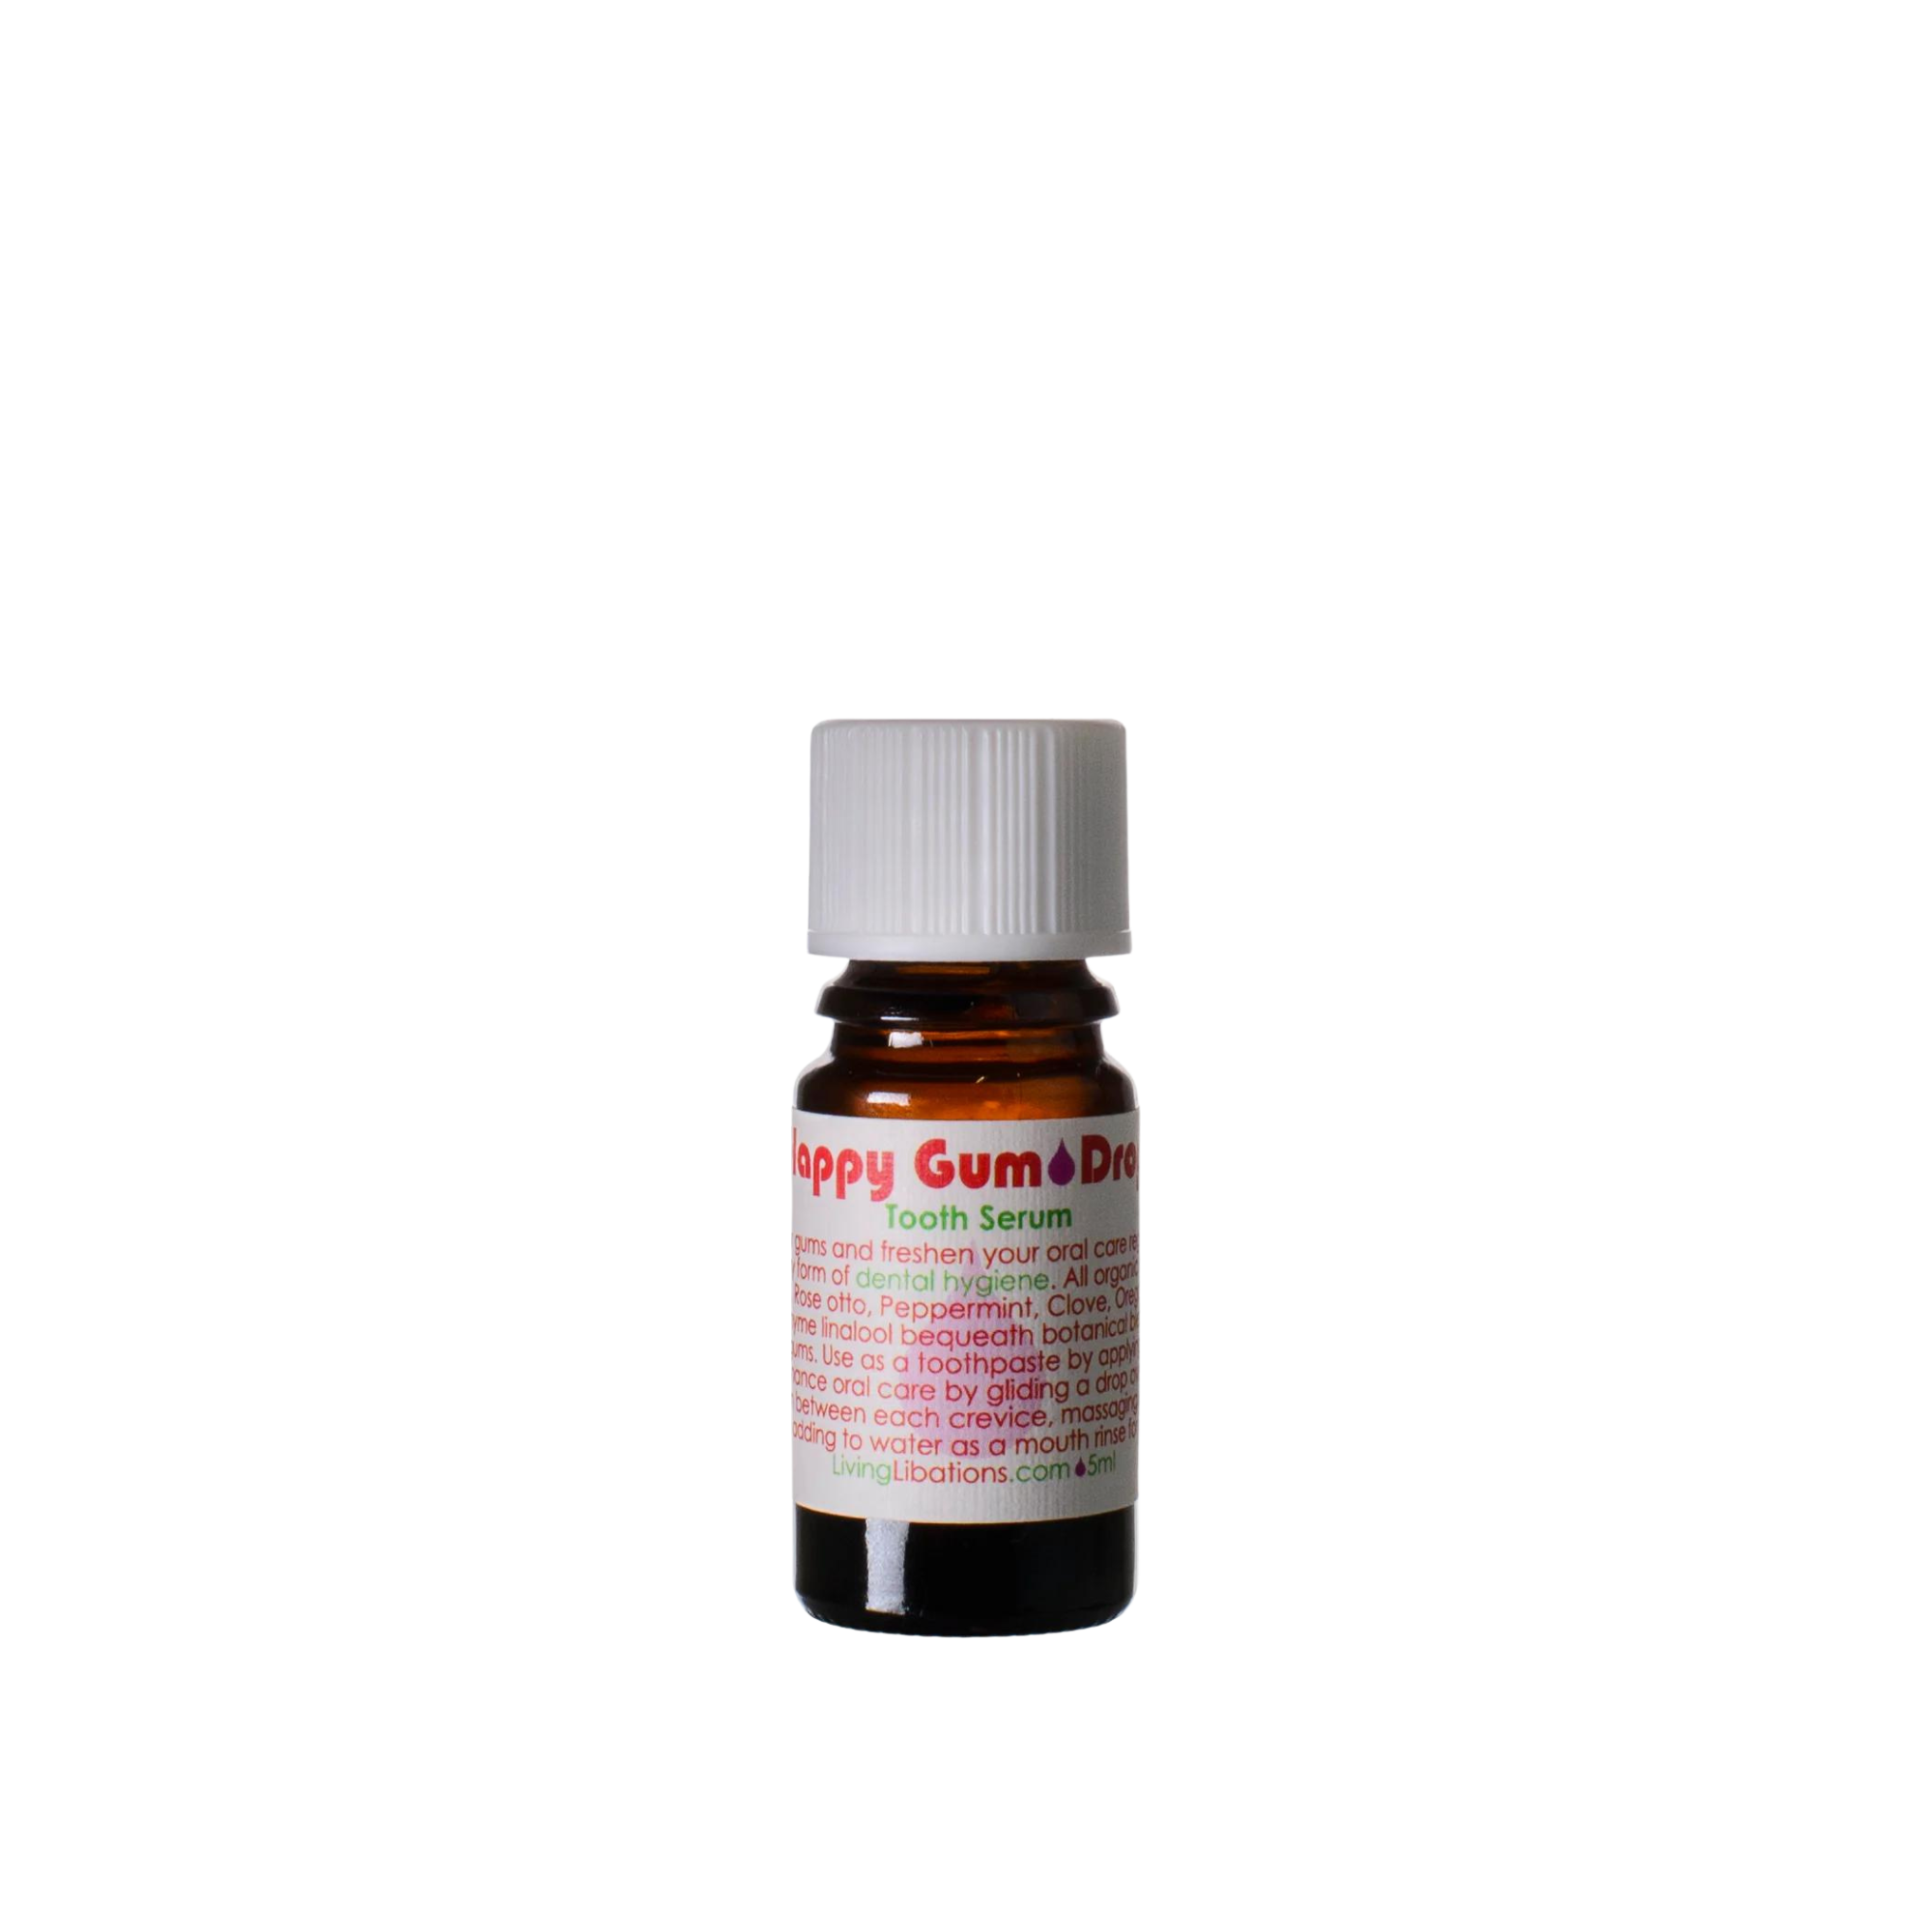 Rose Otto Essential Oil – Living Libations